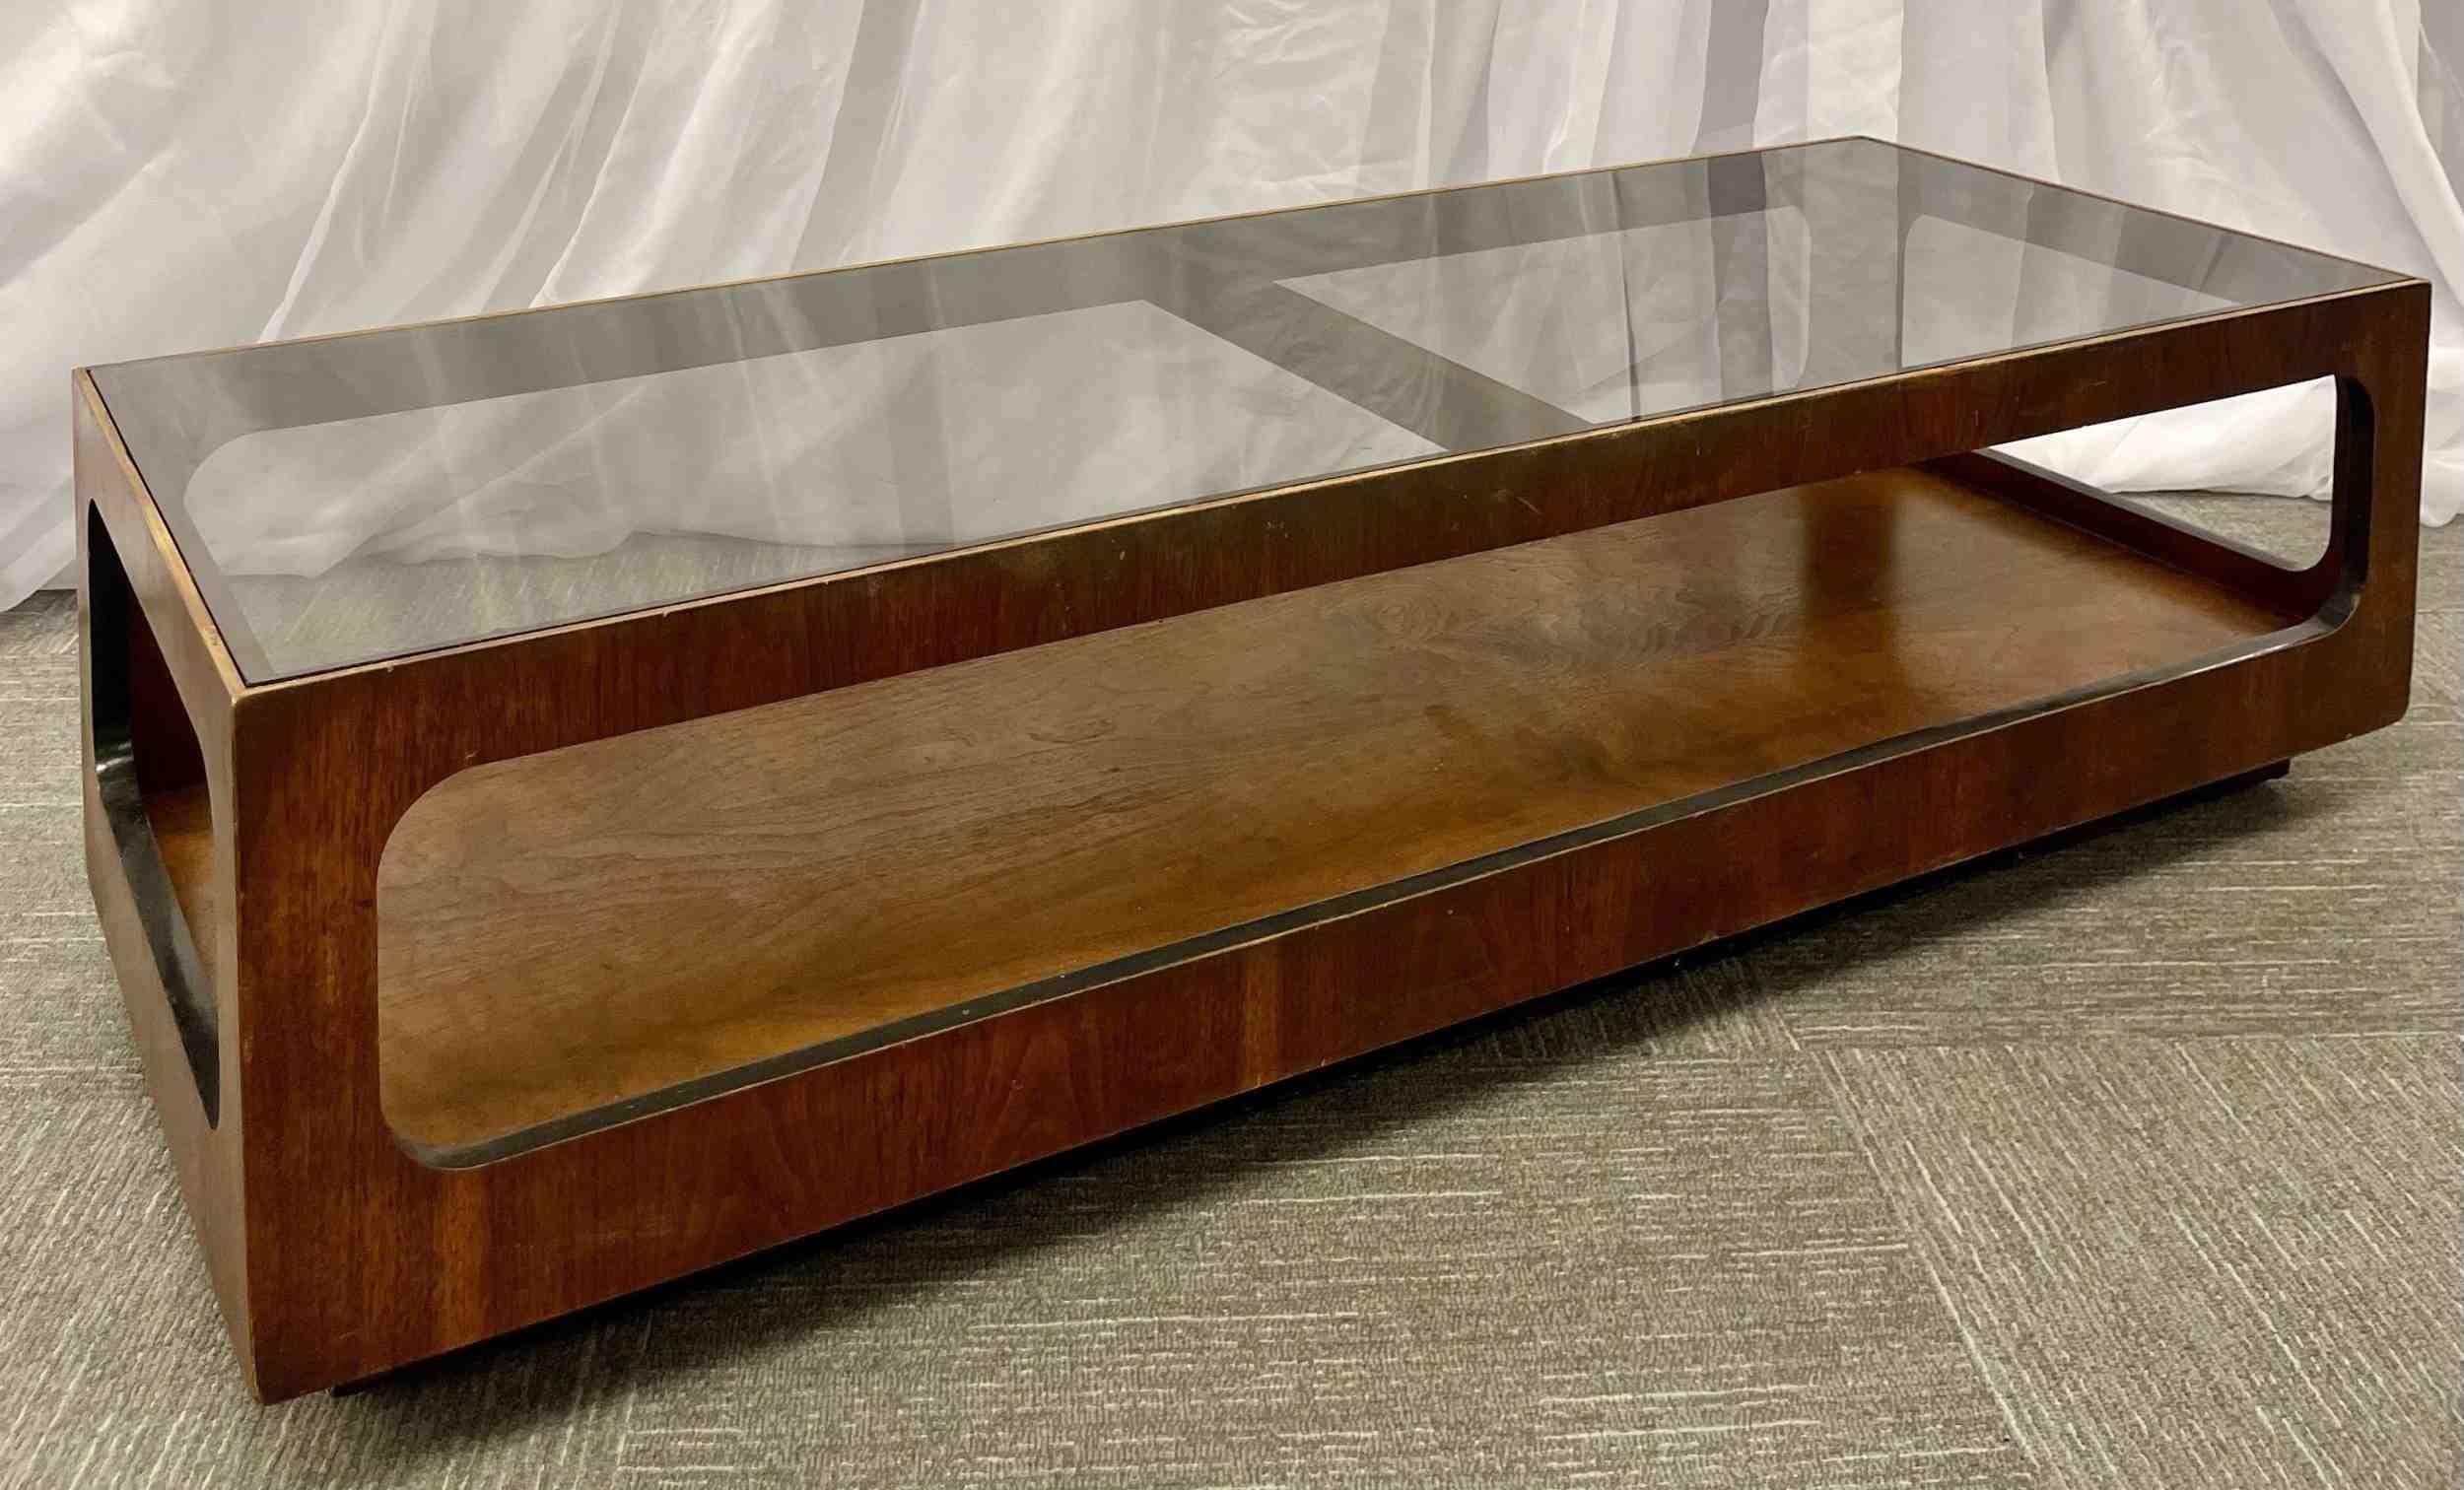 American Mid-Century Modern Rolling Two-Tier Coffee Table by Lane, Glass Top, Wheels